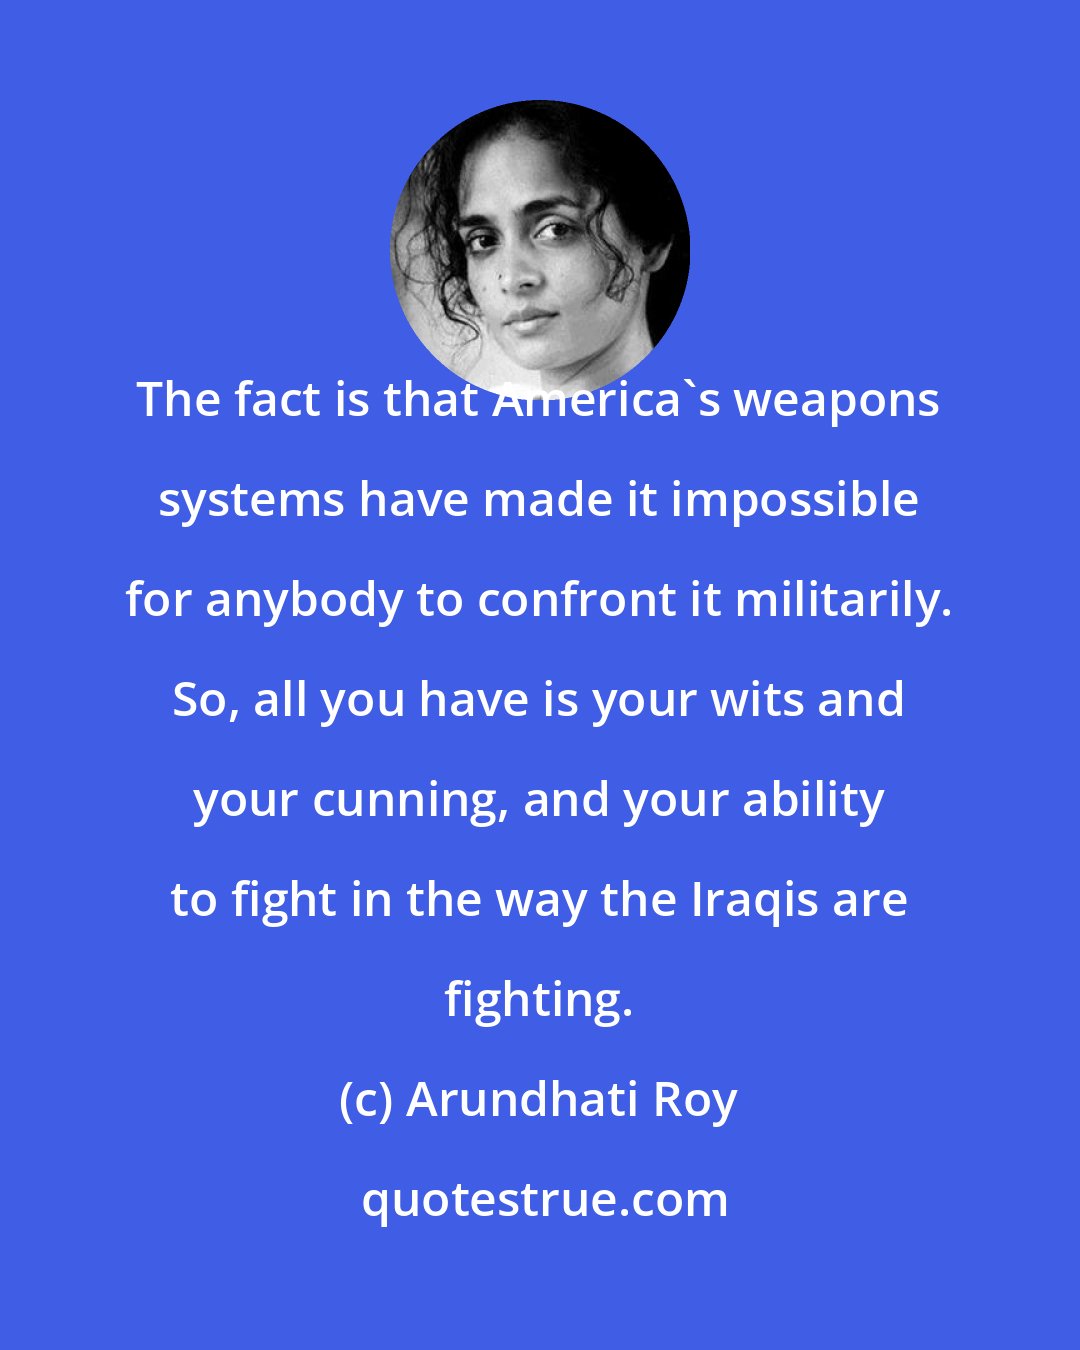 Arundhati Roy: The fact is that America's weapons systems have made it impossible for anybody to confront it militarily. So, all you have is your wits and your cunning, and your ability to fight in the way the Iraqis are fighting.